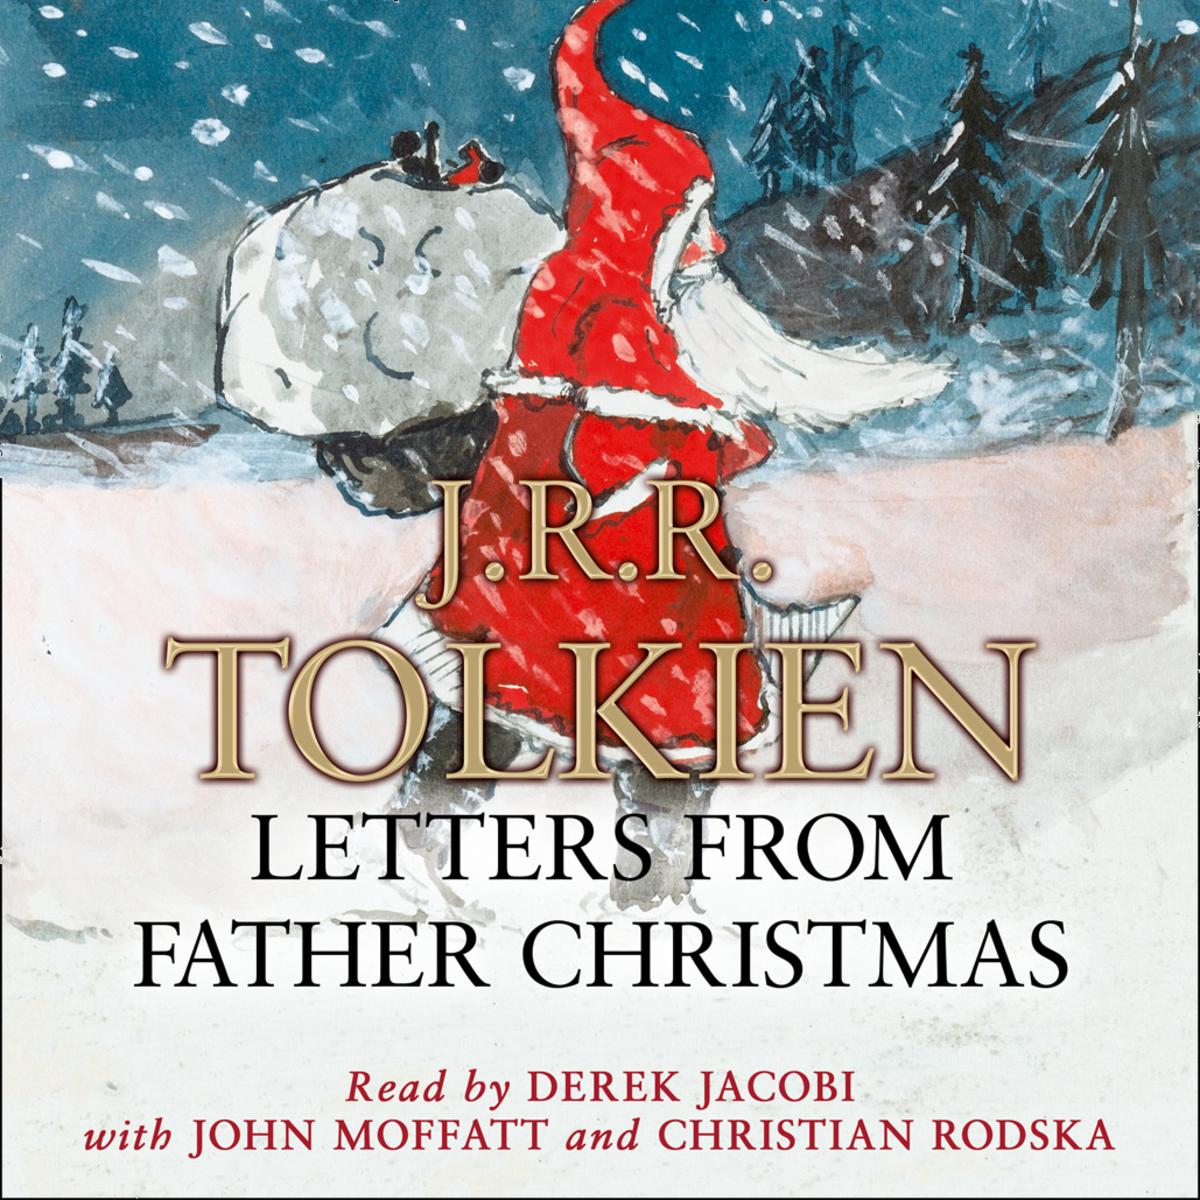 letters-from-father-christmas-by-j-r-r-tolkien-short-audiobook